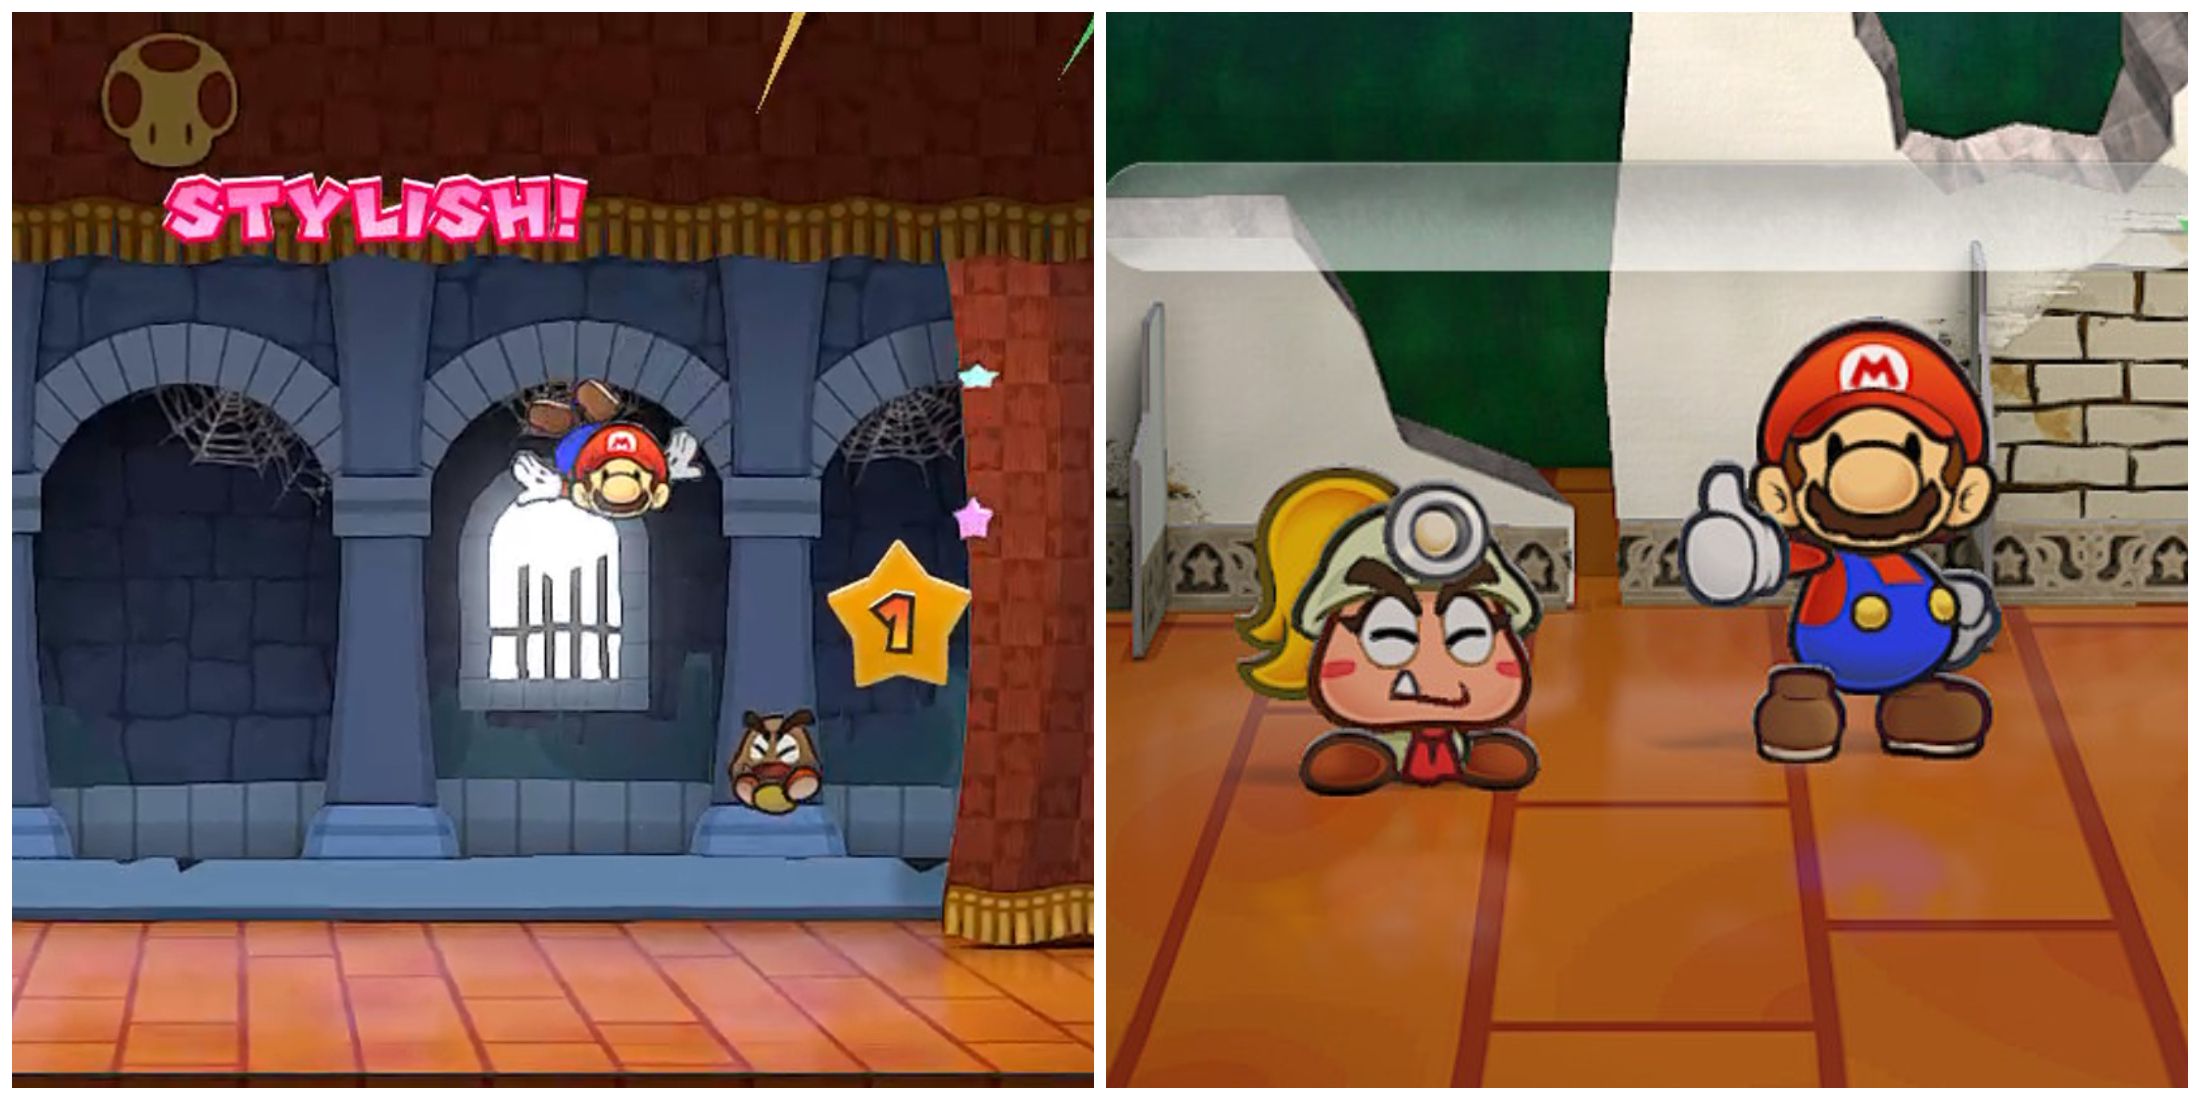 Split image of Mario performing a stylish move and Mario and Goombella after a battle in Paper Mario The Thousand Year Door